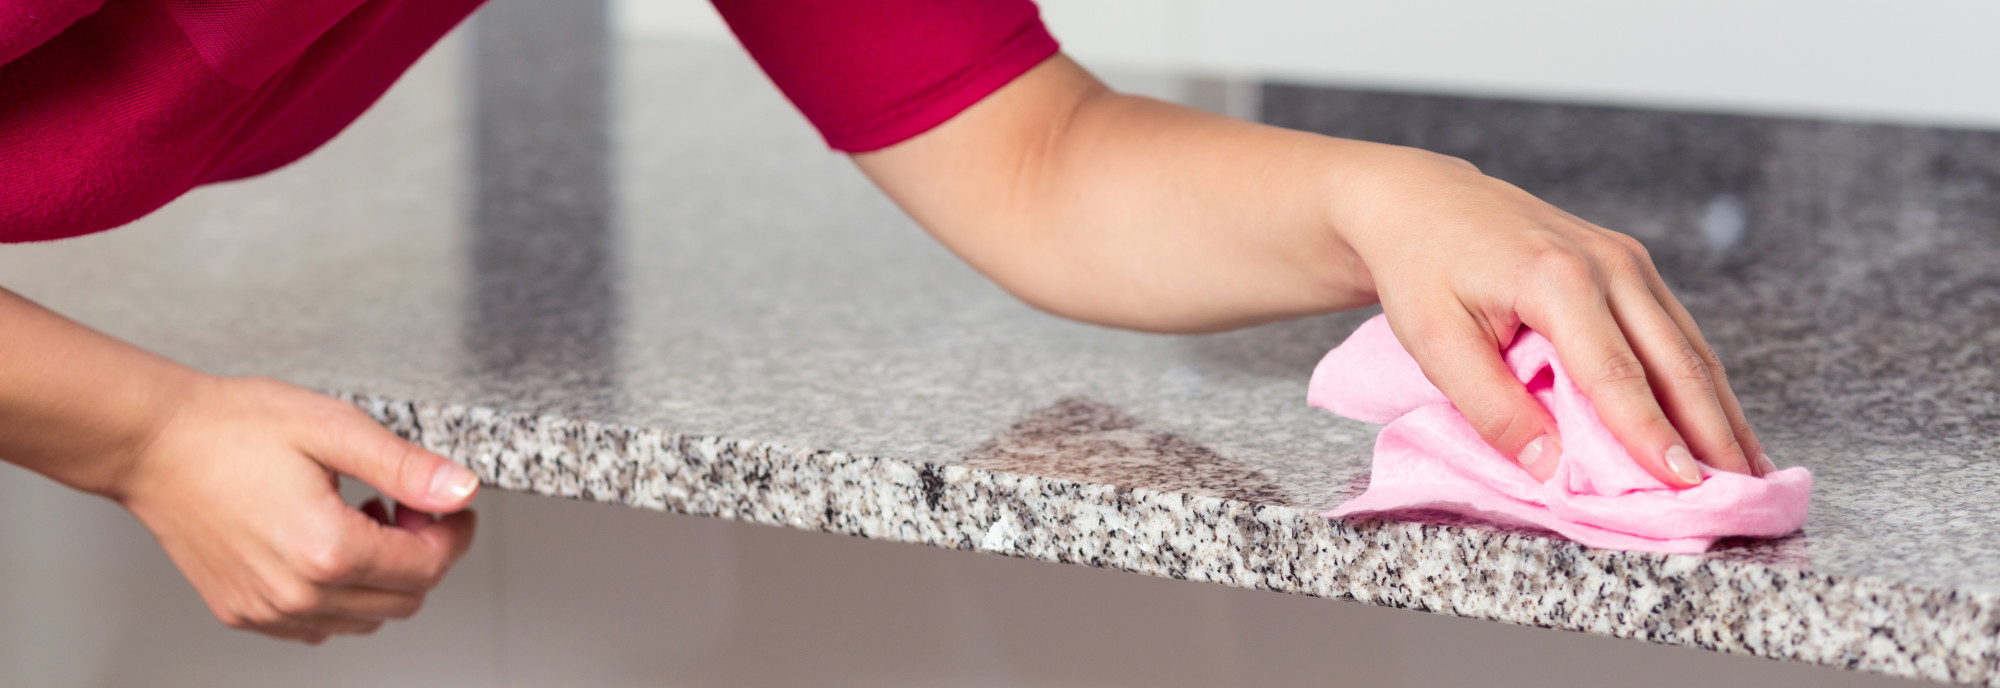 removing stains from countertops